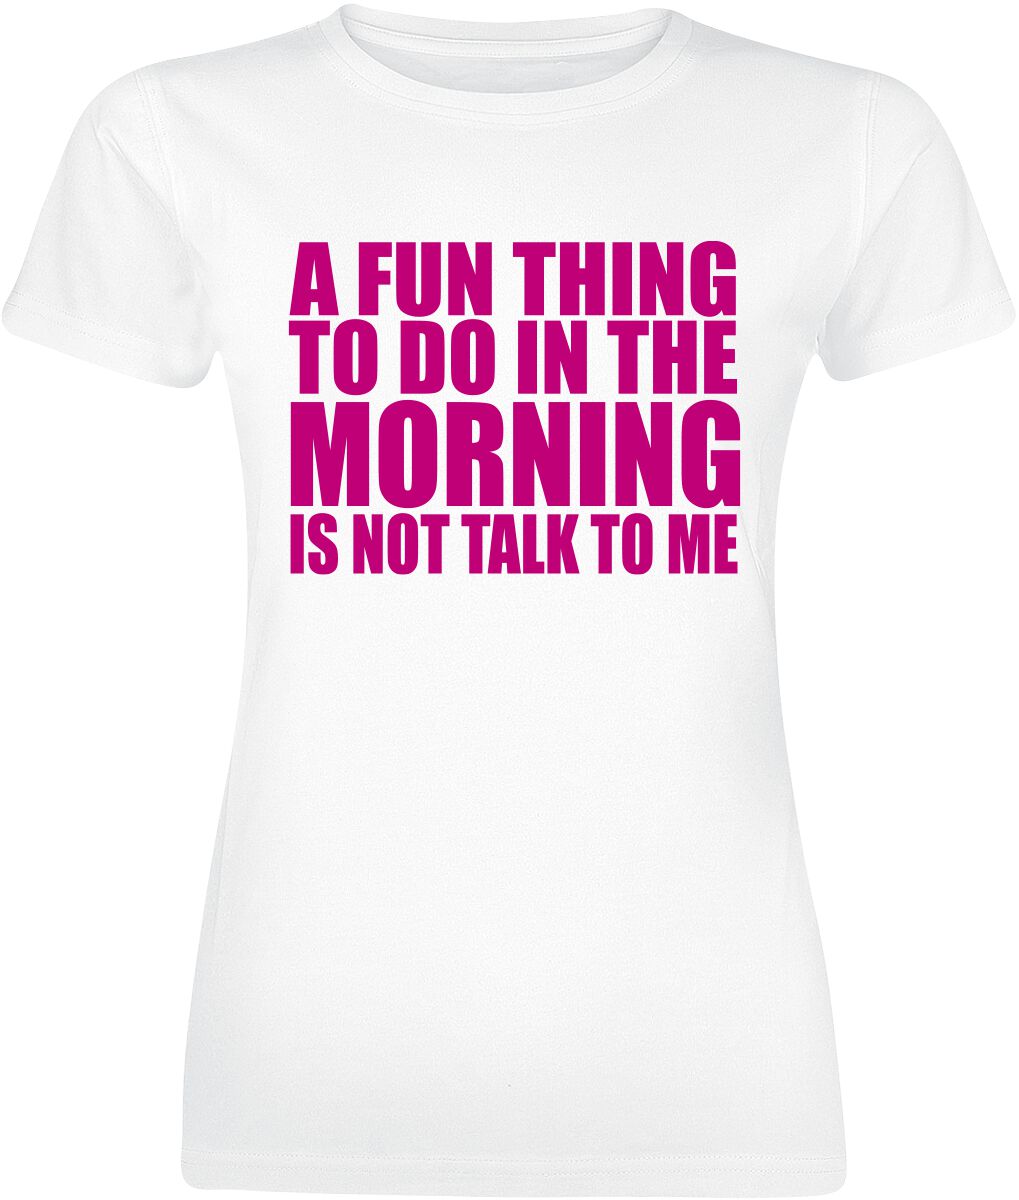 Slogans A Fun Thing To Do In The Morning T-Shirt white